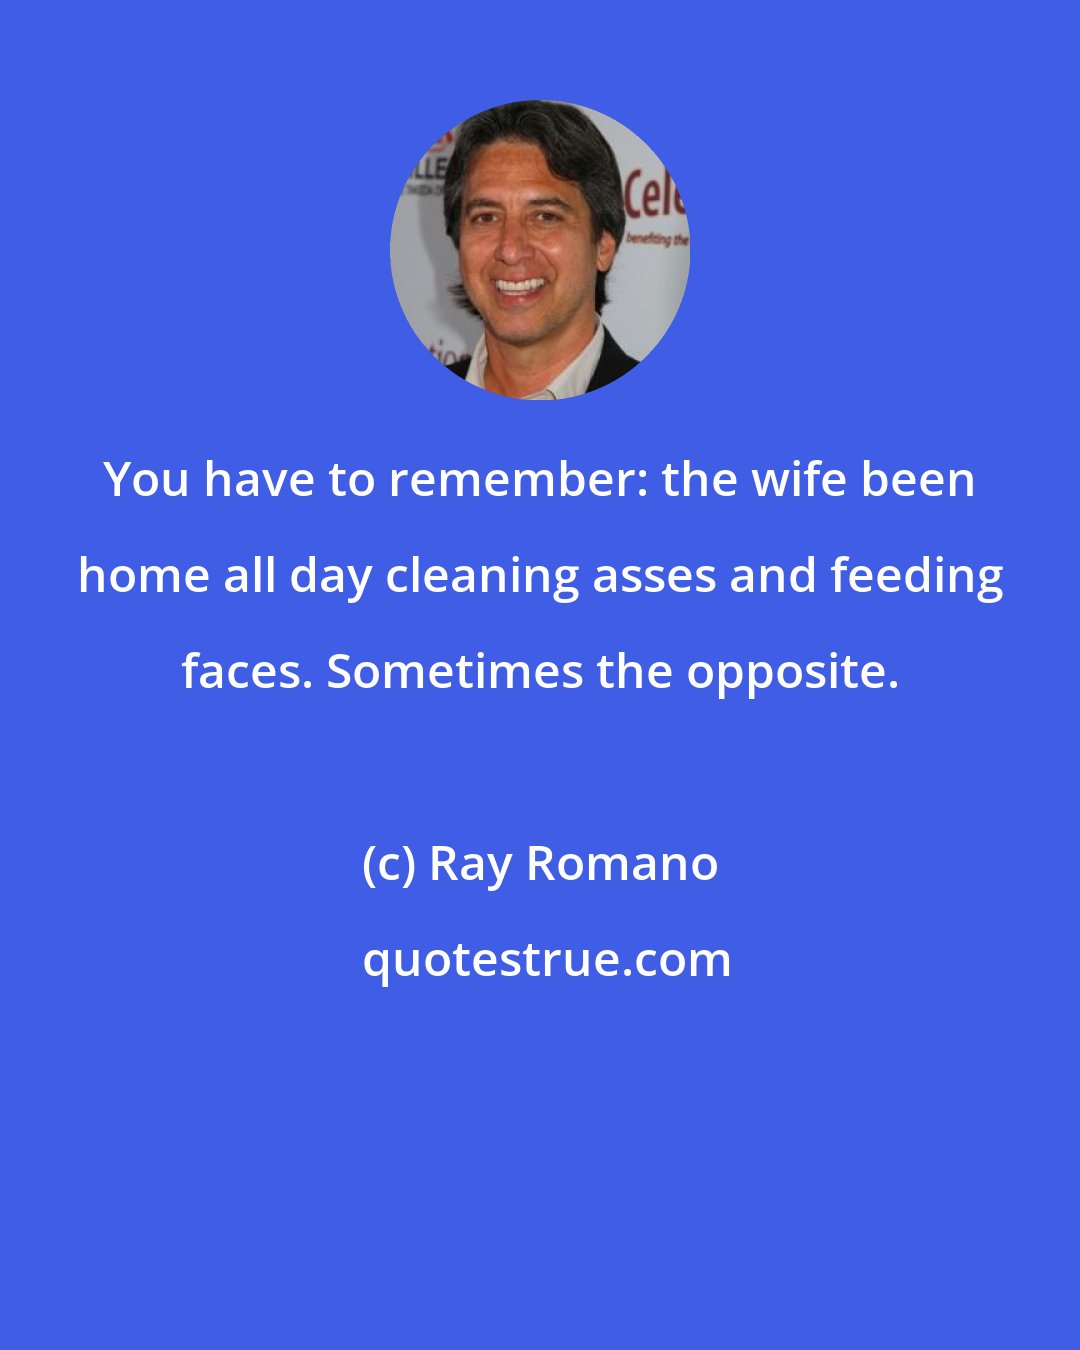 Ray Romano: You have to remember: the wife been home all day cleaning asses and feeding faces. Sometimes the opposite.